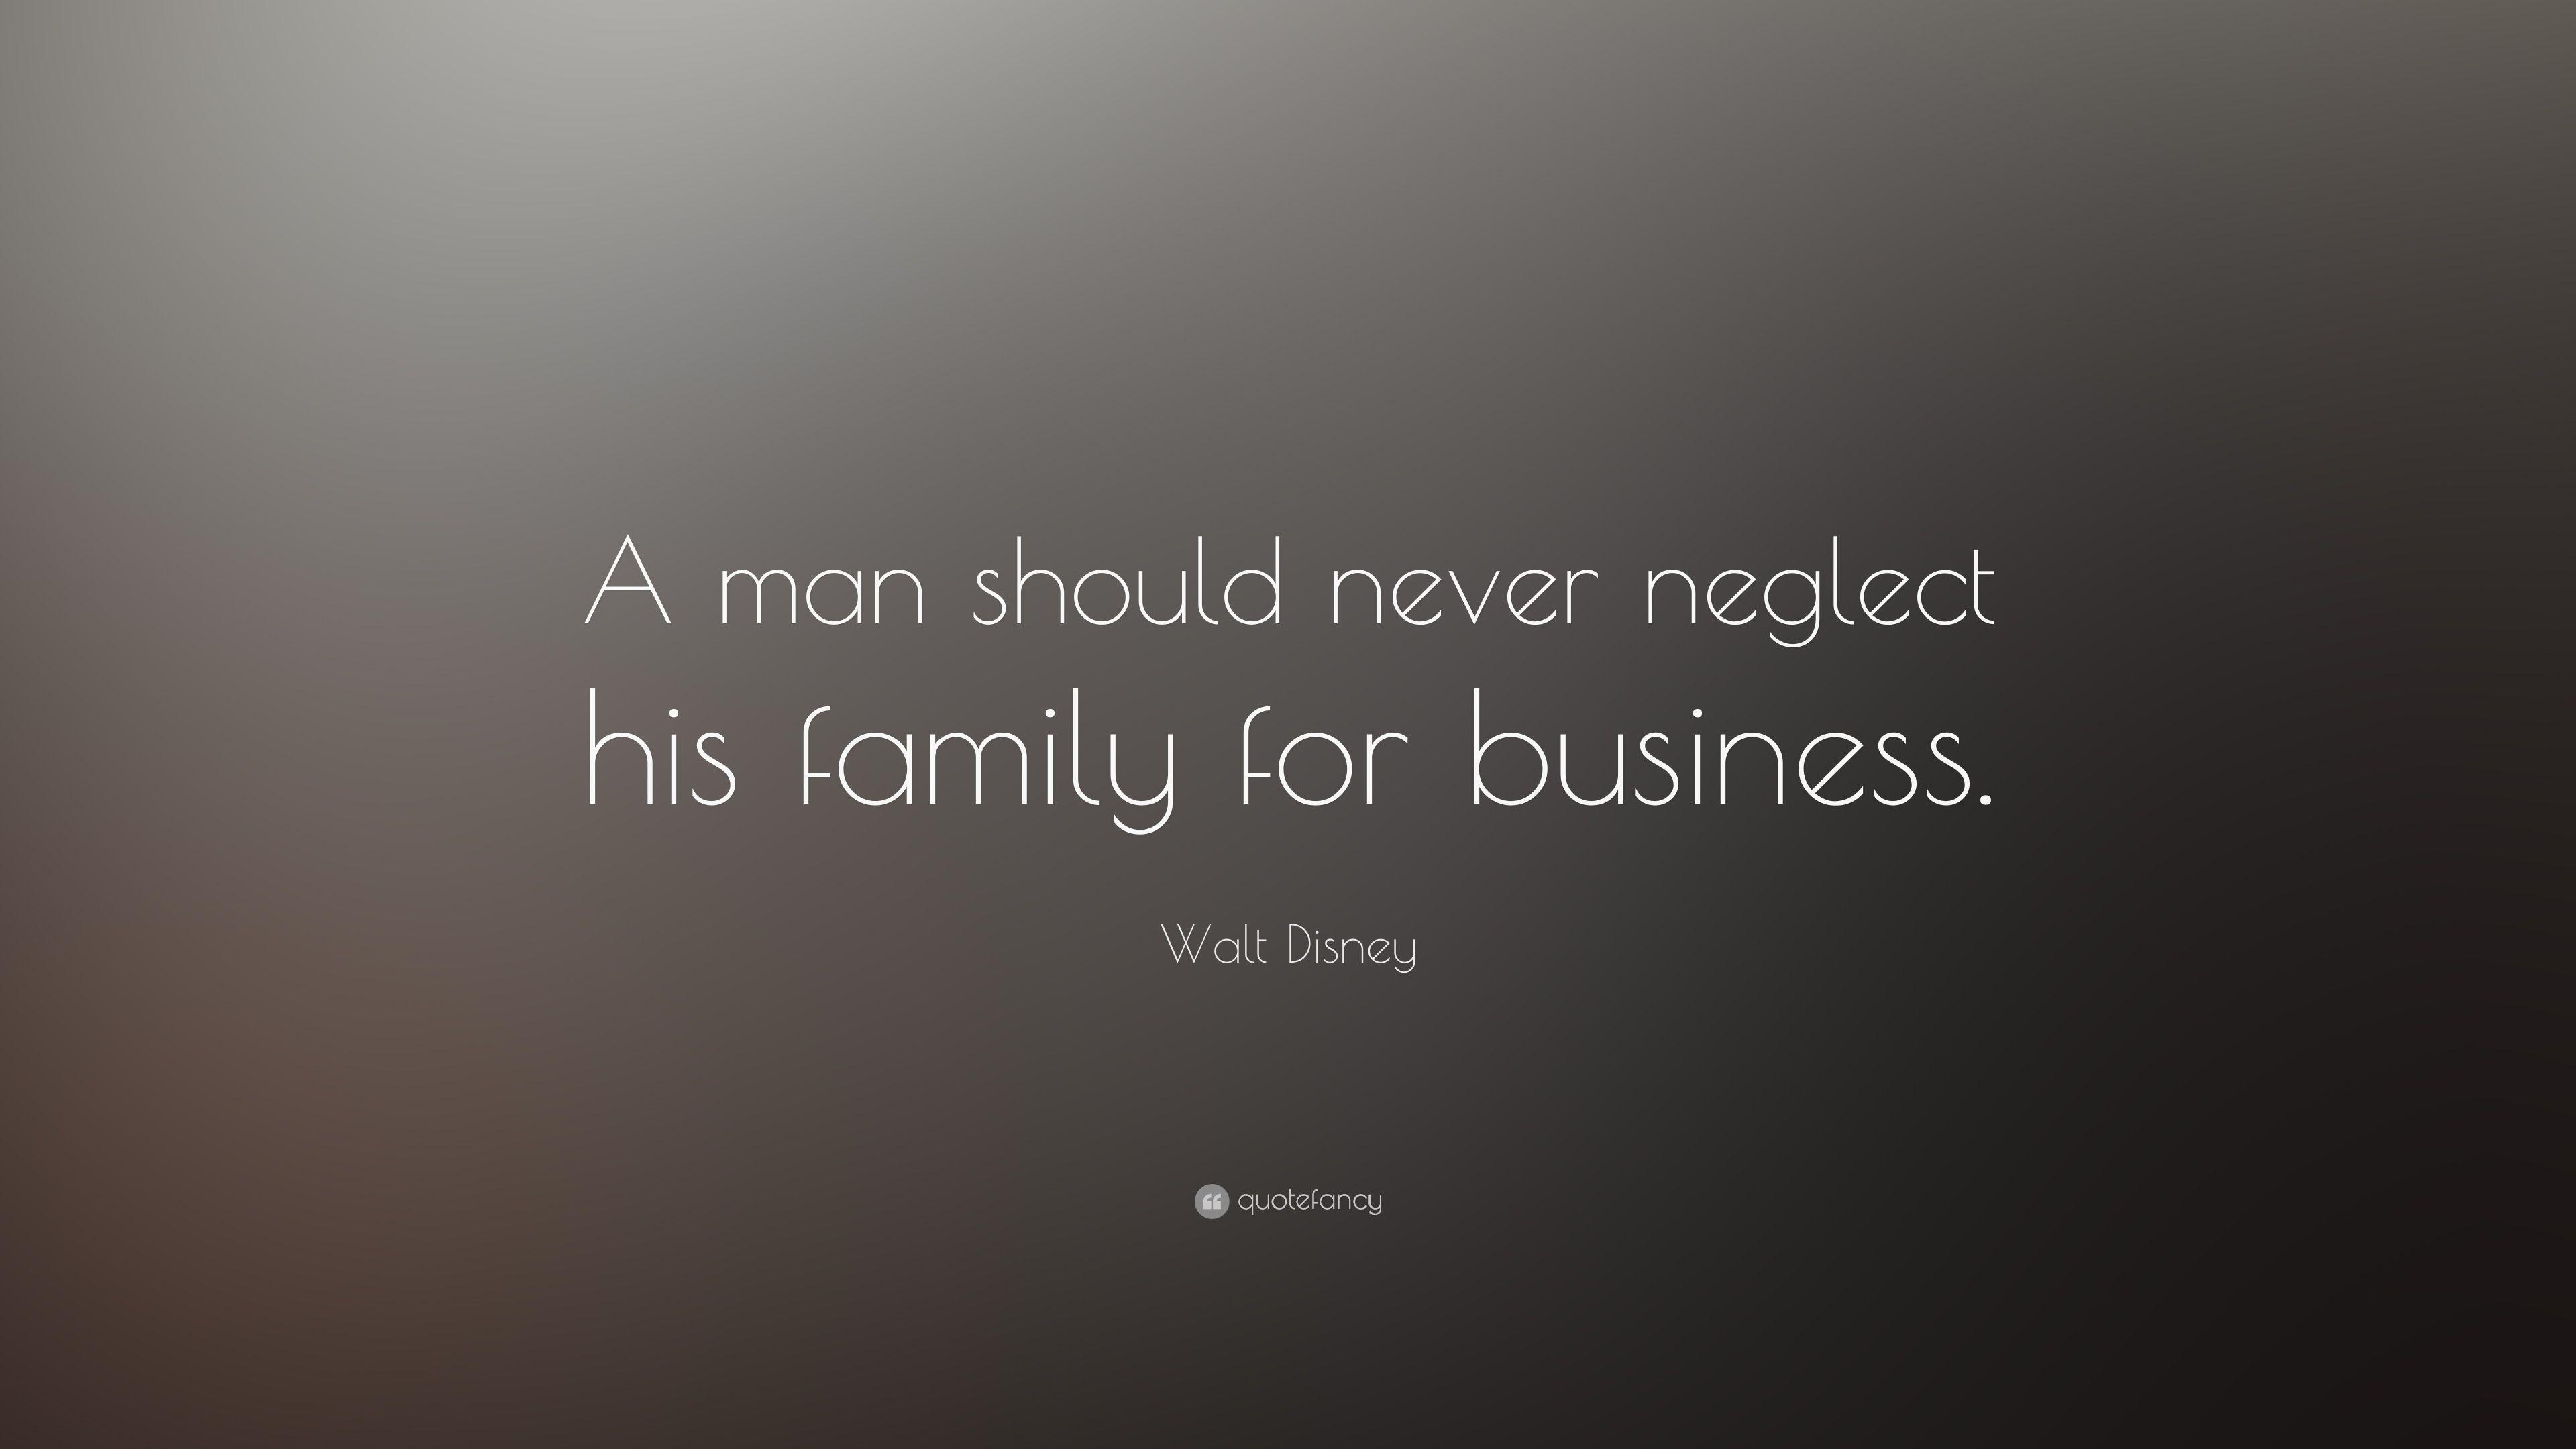 Walt Disney Quote: “A man should never neglect his family